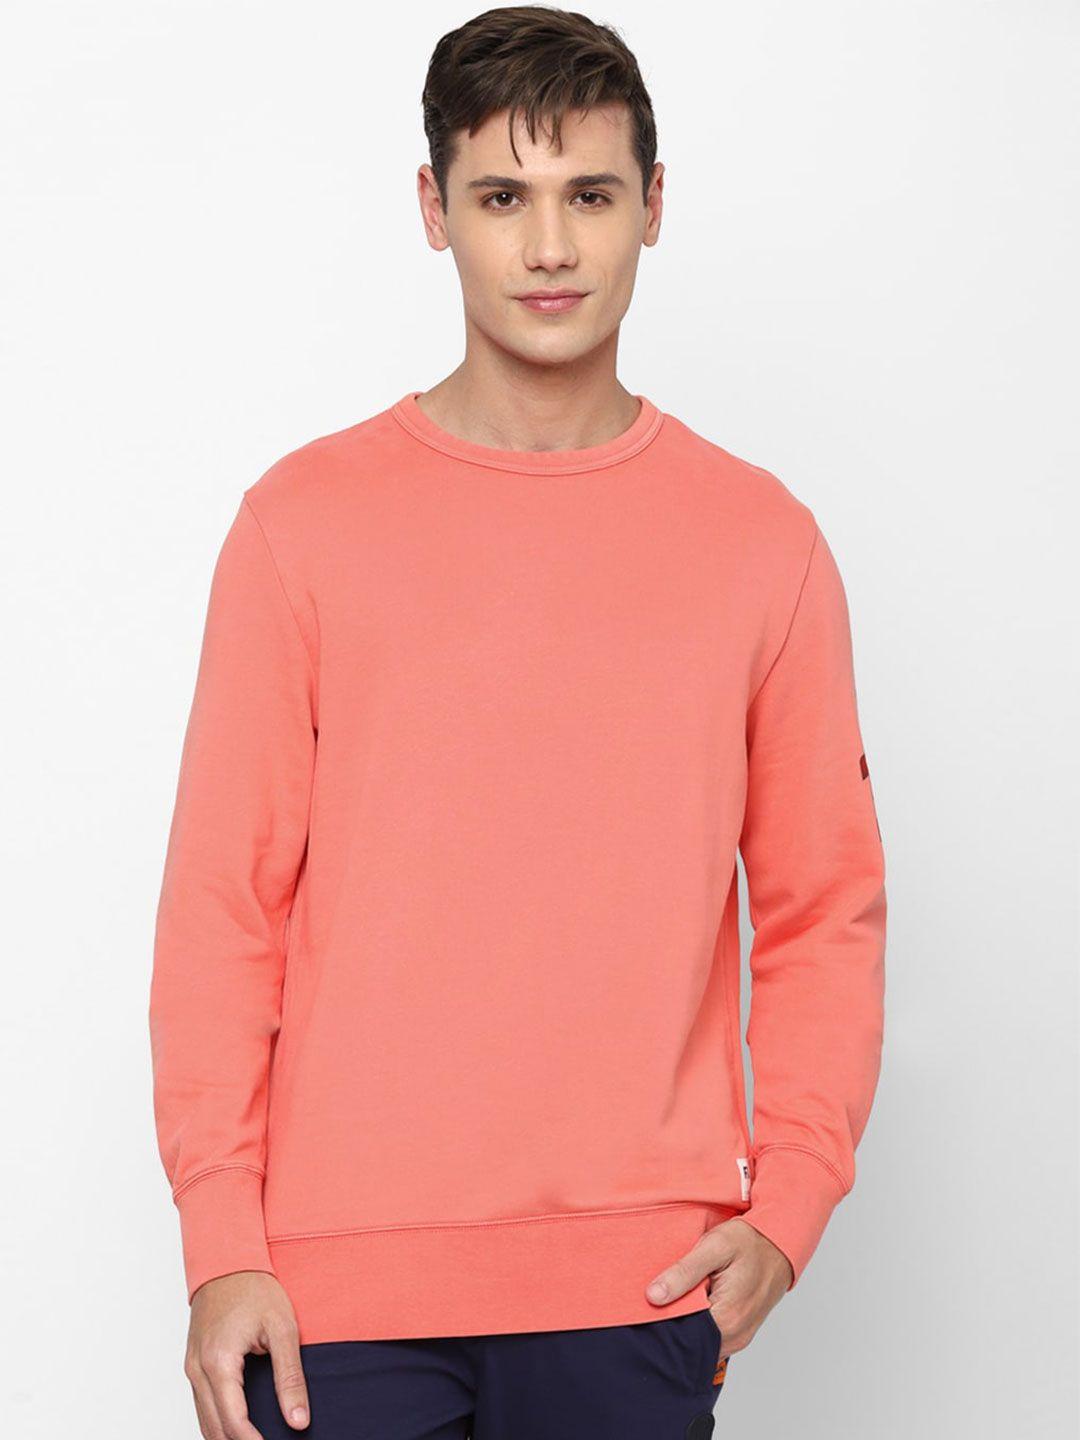 american-eagle-outfitters-men-pink-solid-sweatshirt